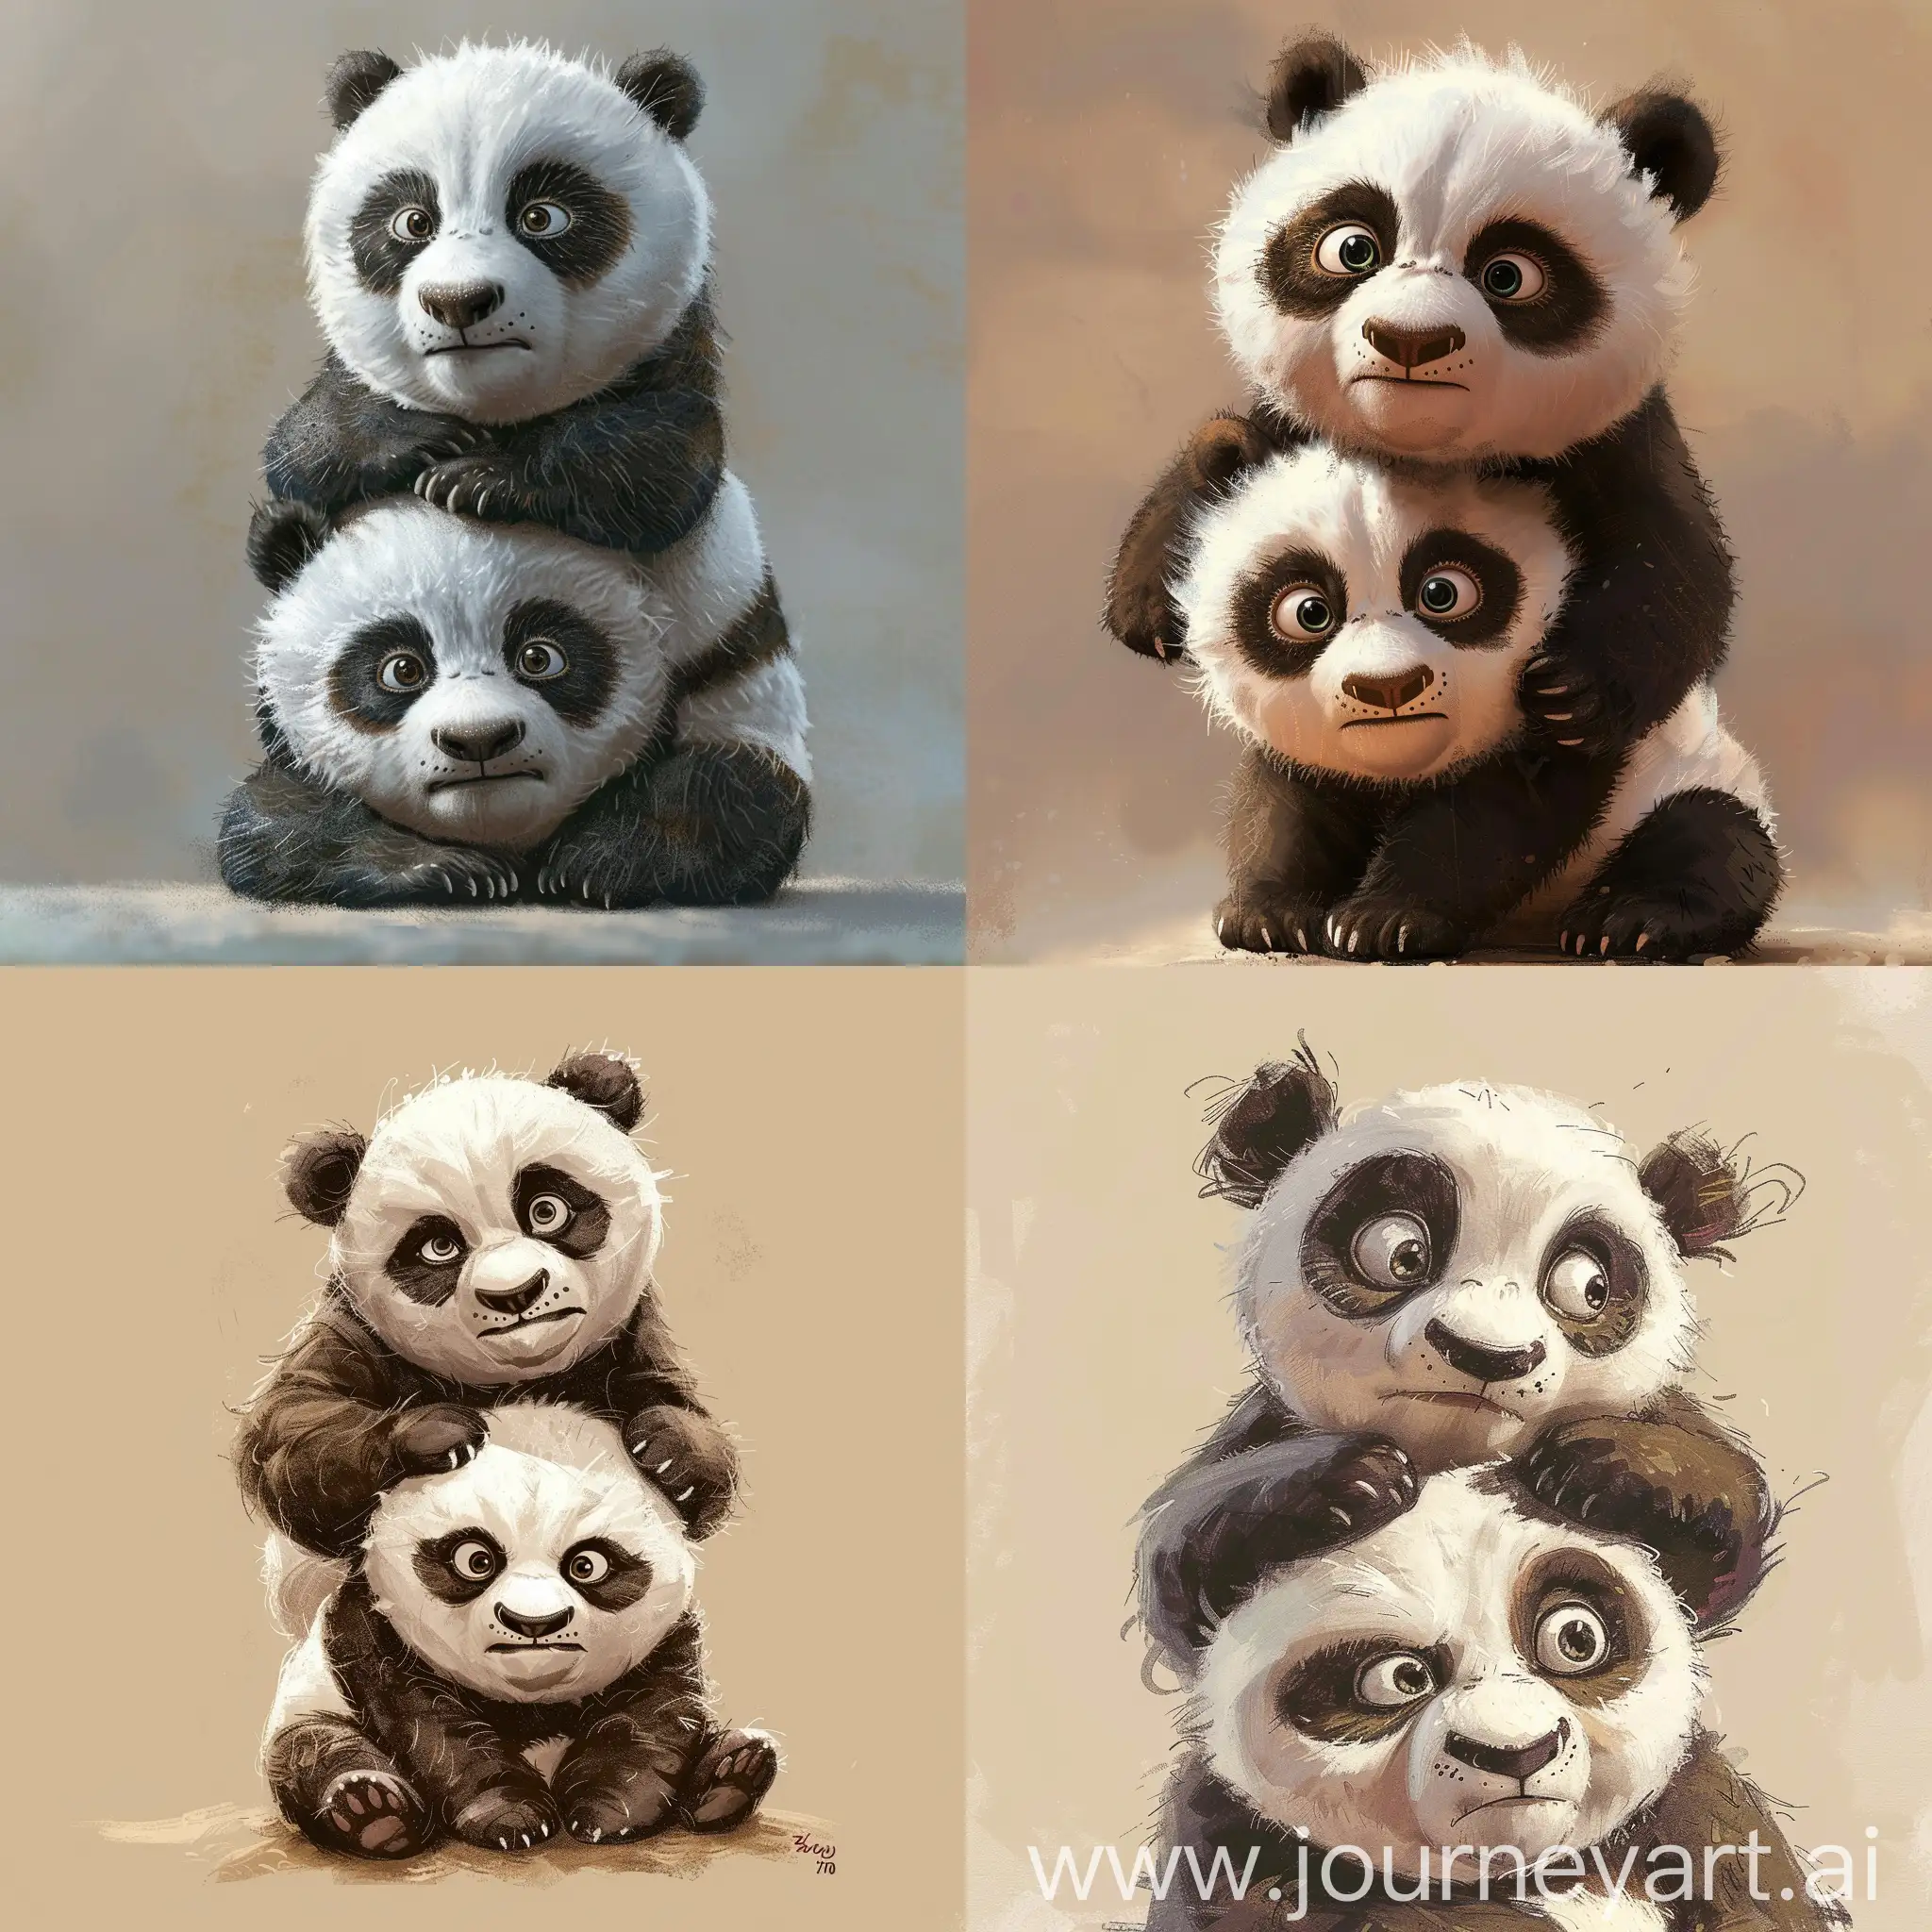 create a simple colour piece of high quality art in the style of the film 'kungfu panda' but slightly more realistic an image of two baby pandas, one sat on top of the other, the one on the bottom has a perplexed look on their face, the one on the top looks very smug.